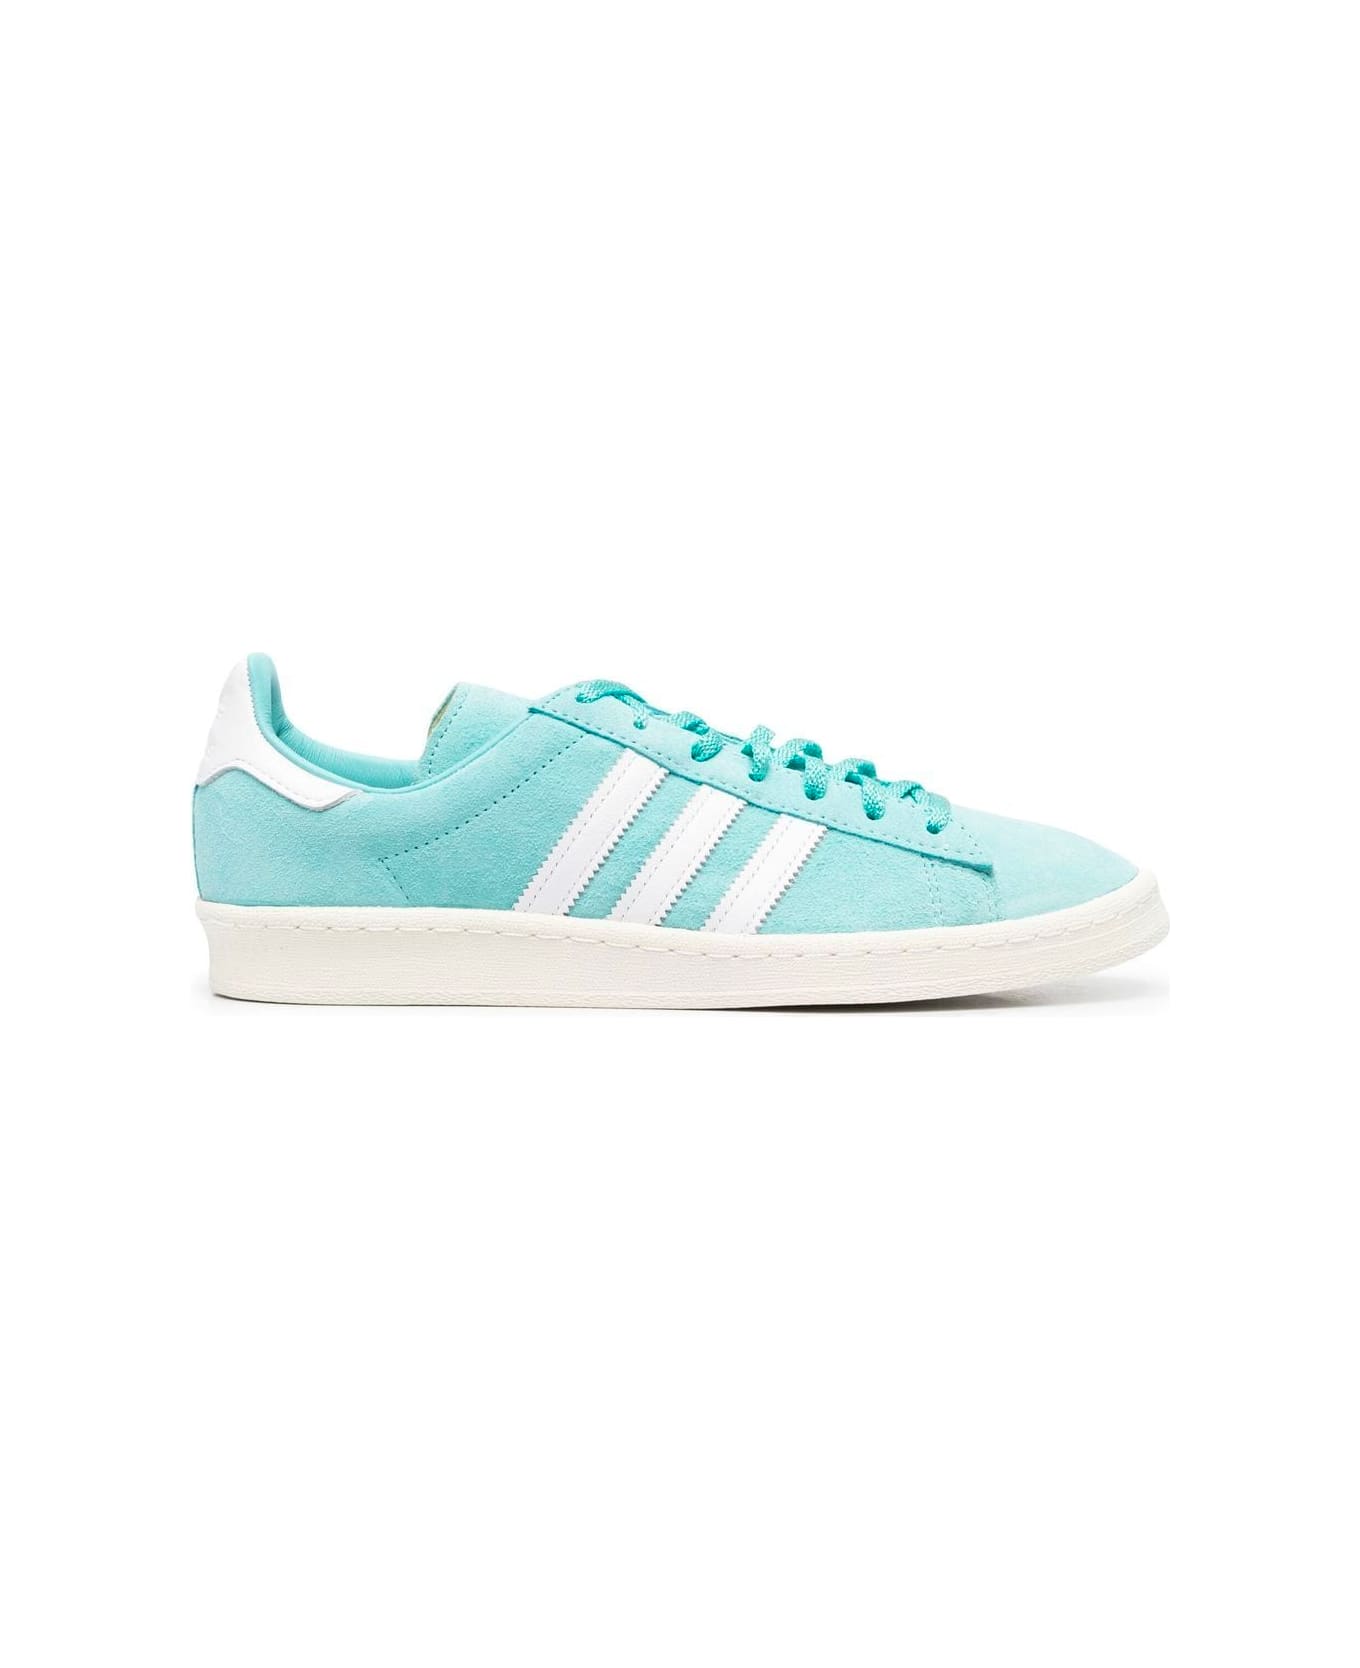 Adidas Campus 80s Sneakers - Easmin Ftwwht Owhite